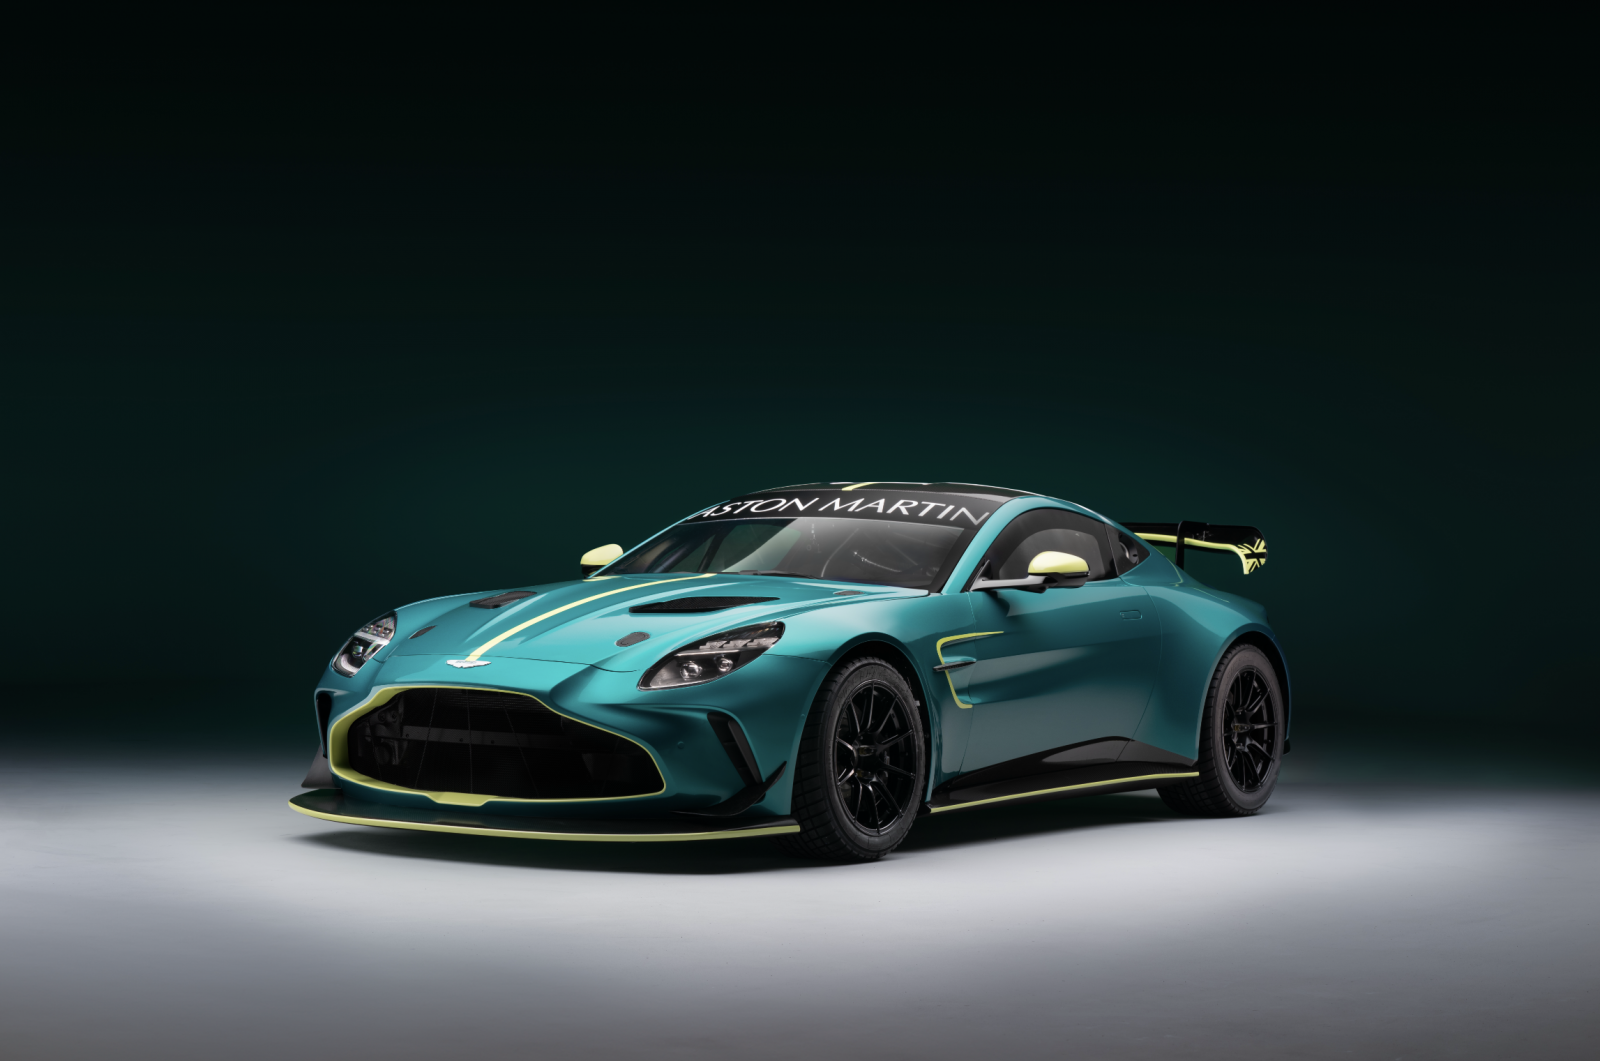 New Aston Martin Vantage GT4 completes top-flight line-up of production-based GT racers